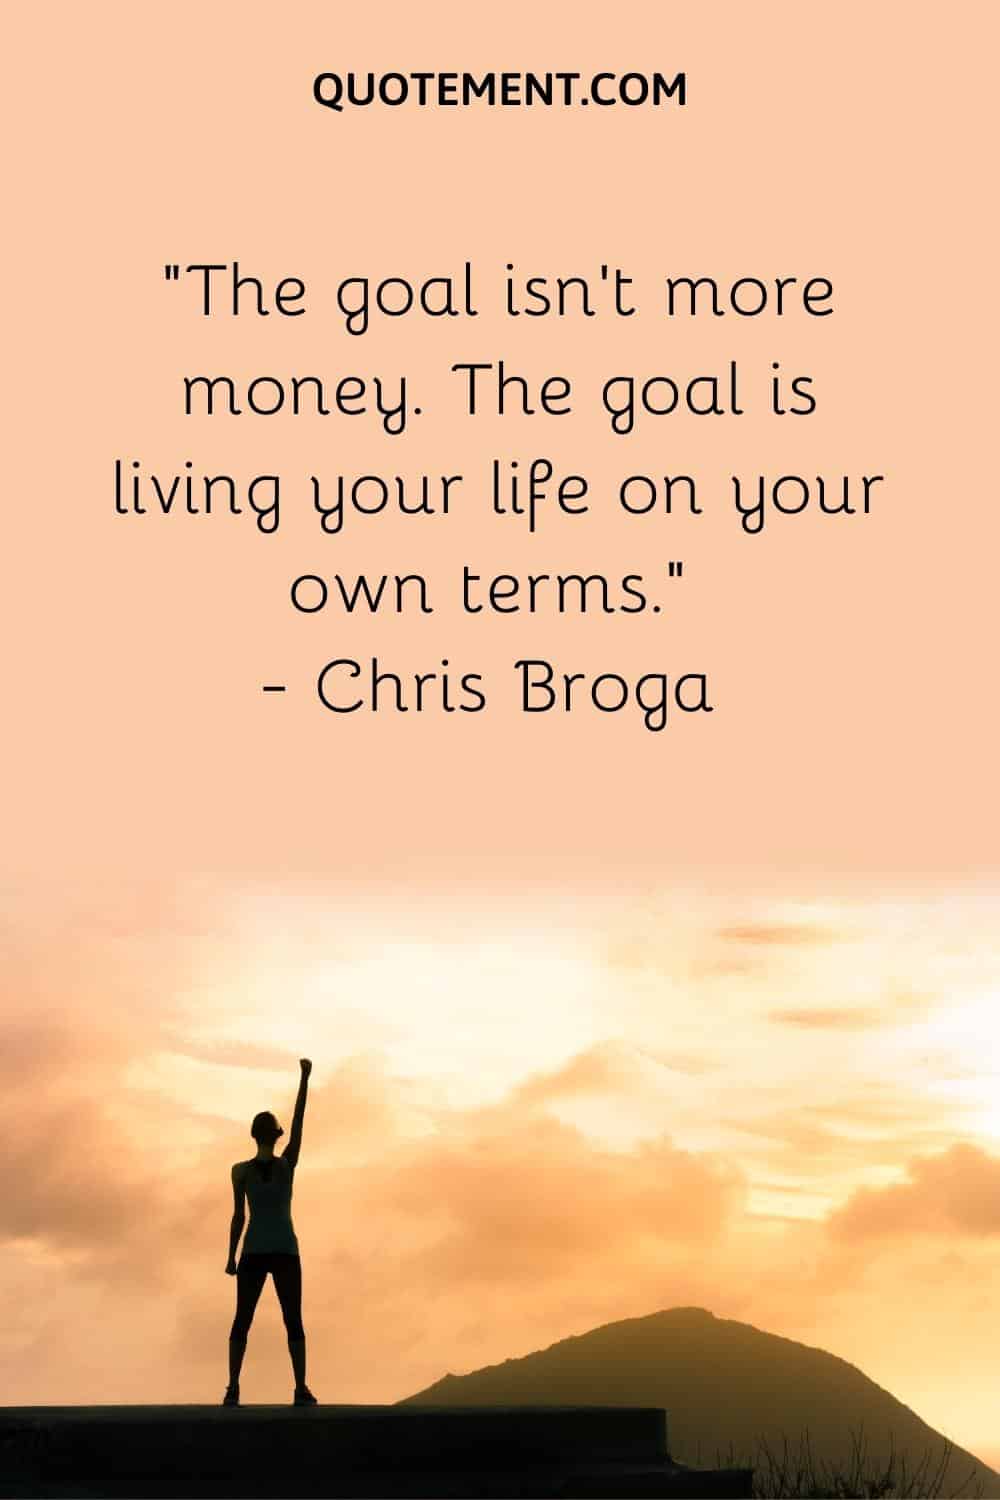 The goal isn’t more money. The goal is living your life on your own terms